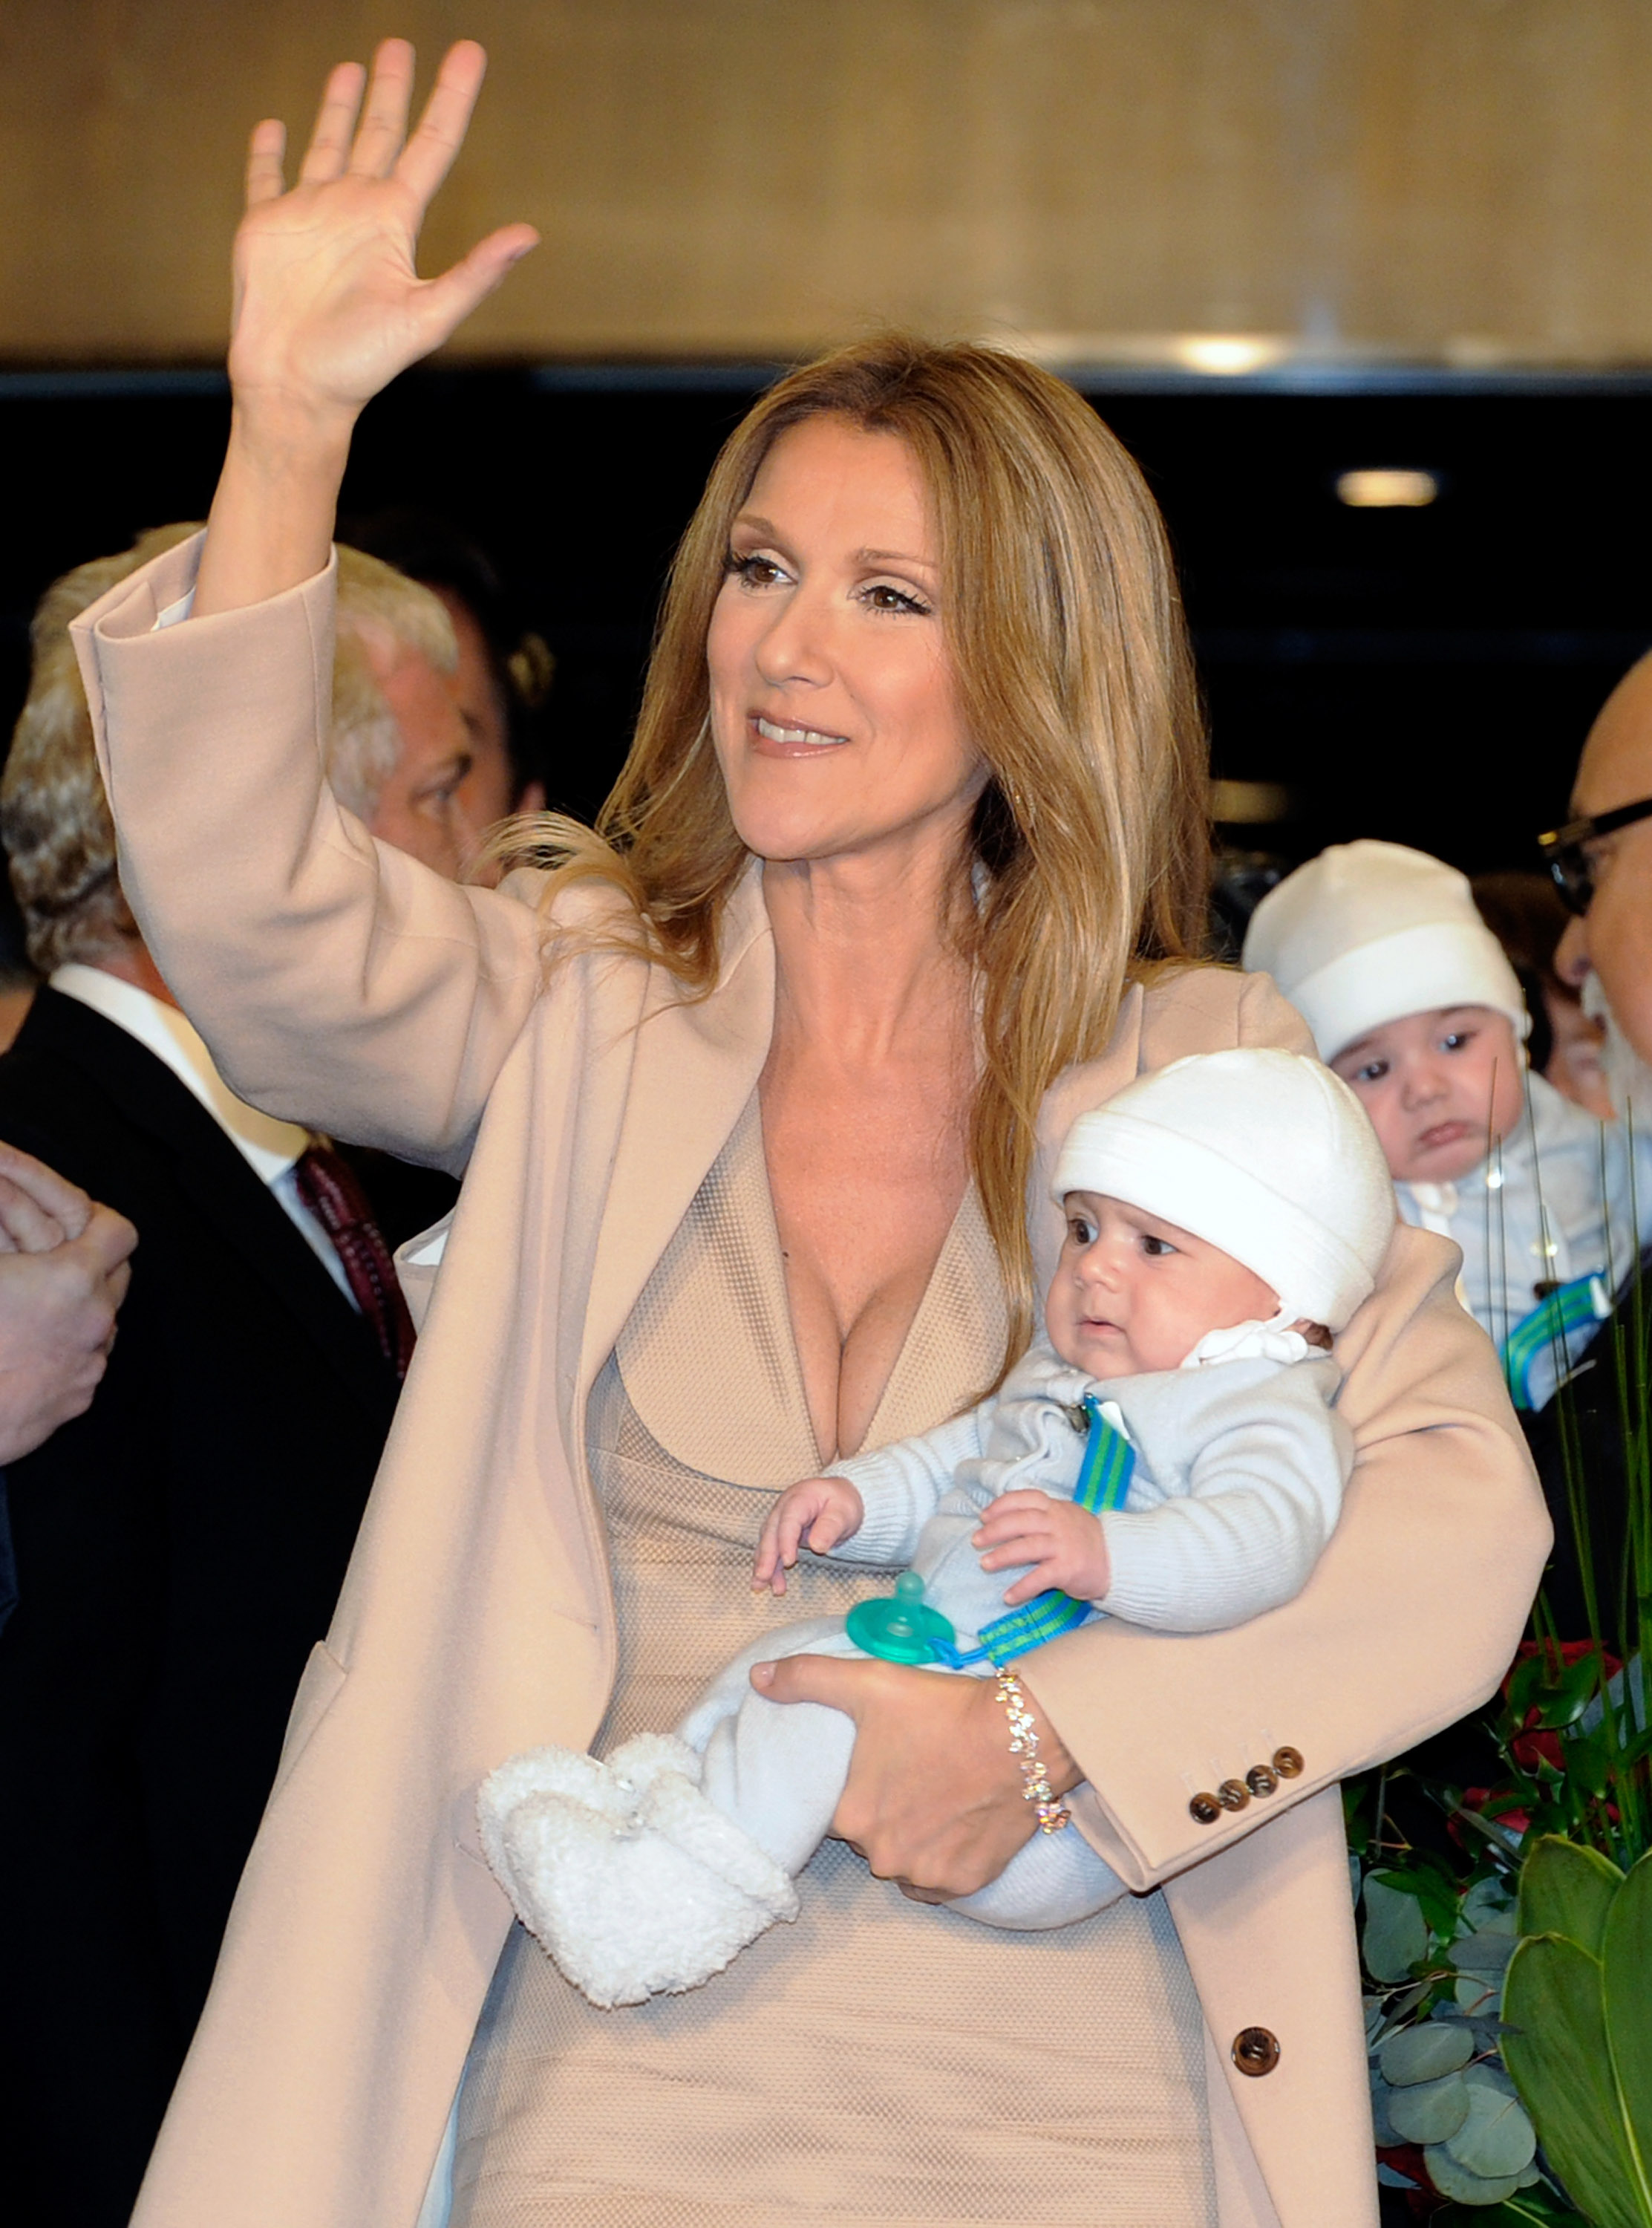 Celine Dion waves as she holds Nelson Angelil, with Eddy Angelil in the background, as she arrives at Caesars Palace in Las Vegas, Nevada, on February 16, 2011. | Source: Getty Images